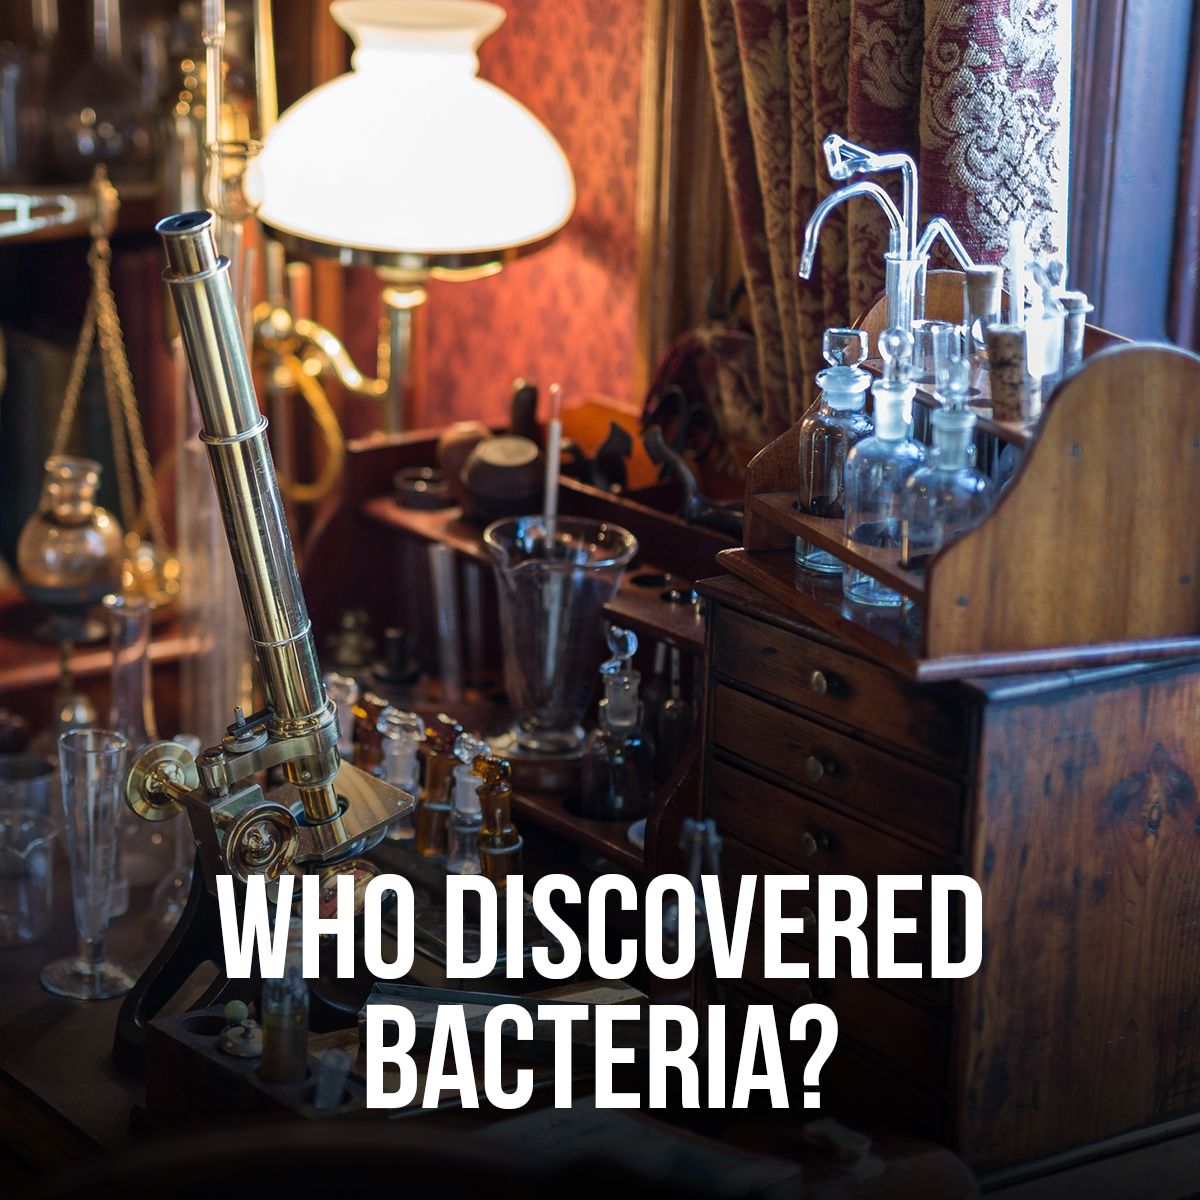 Who Discovered Bacteria?